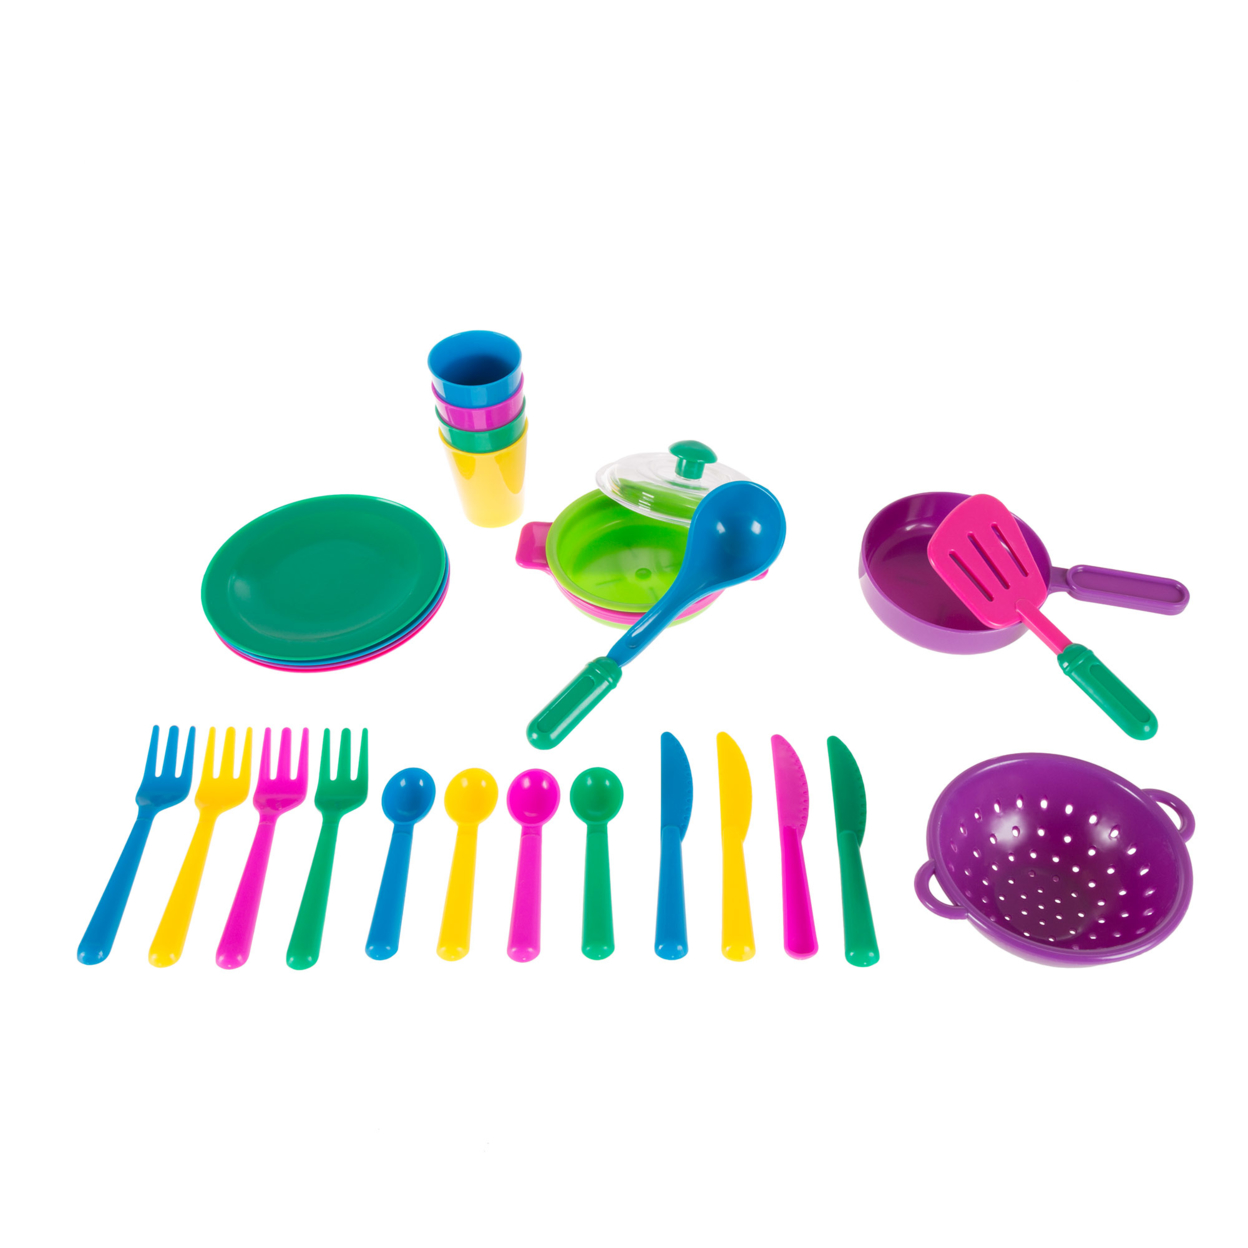 Kids Toy Play Dishes Tableware Dish Drainer Plates Forks Cups Kitchen Play Set